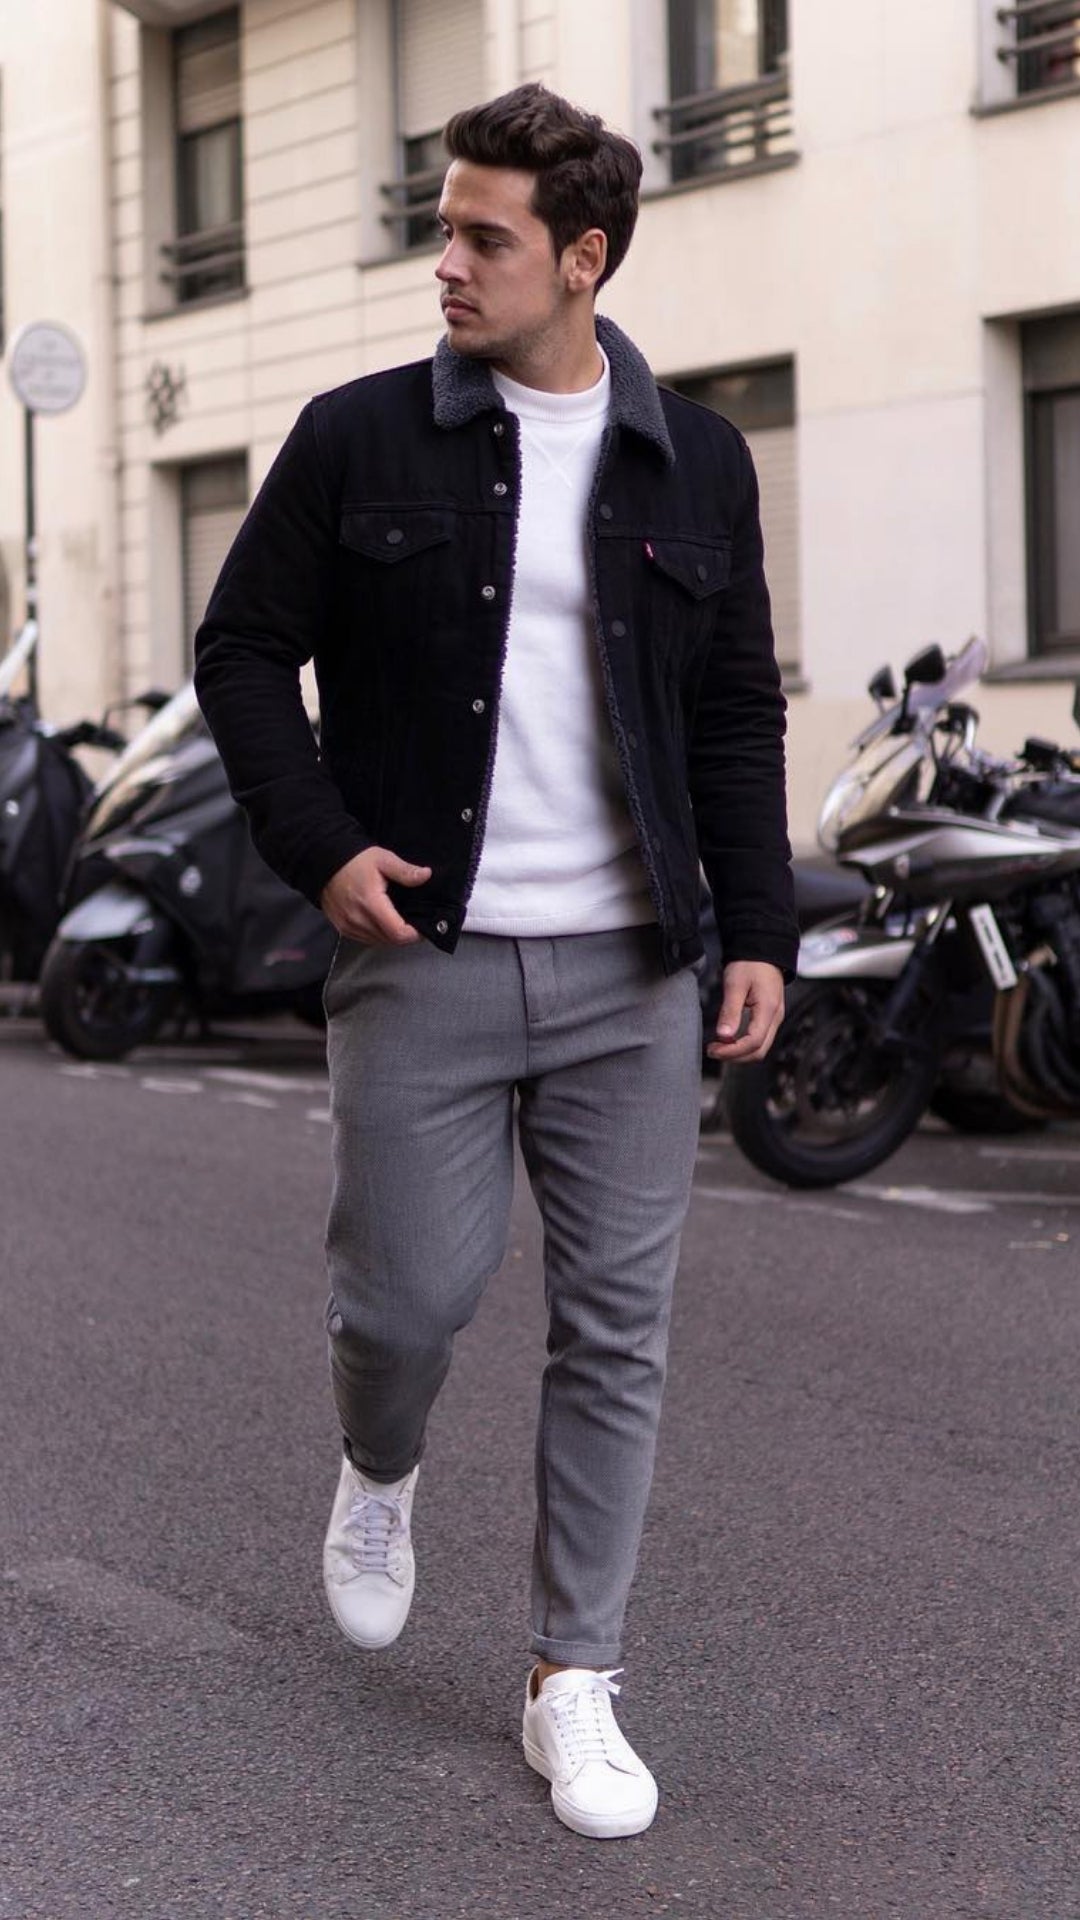 Monochrome Dressing Style For Men - 5 Outfits To Try – LIFESTYLE BY PS